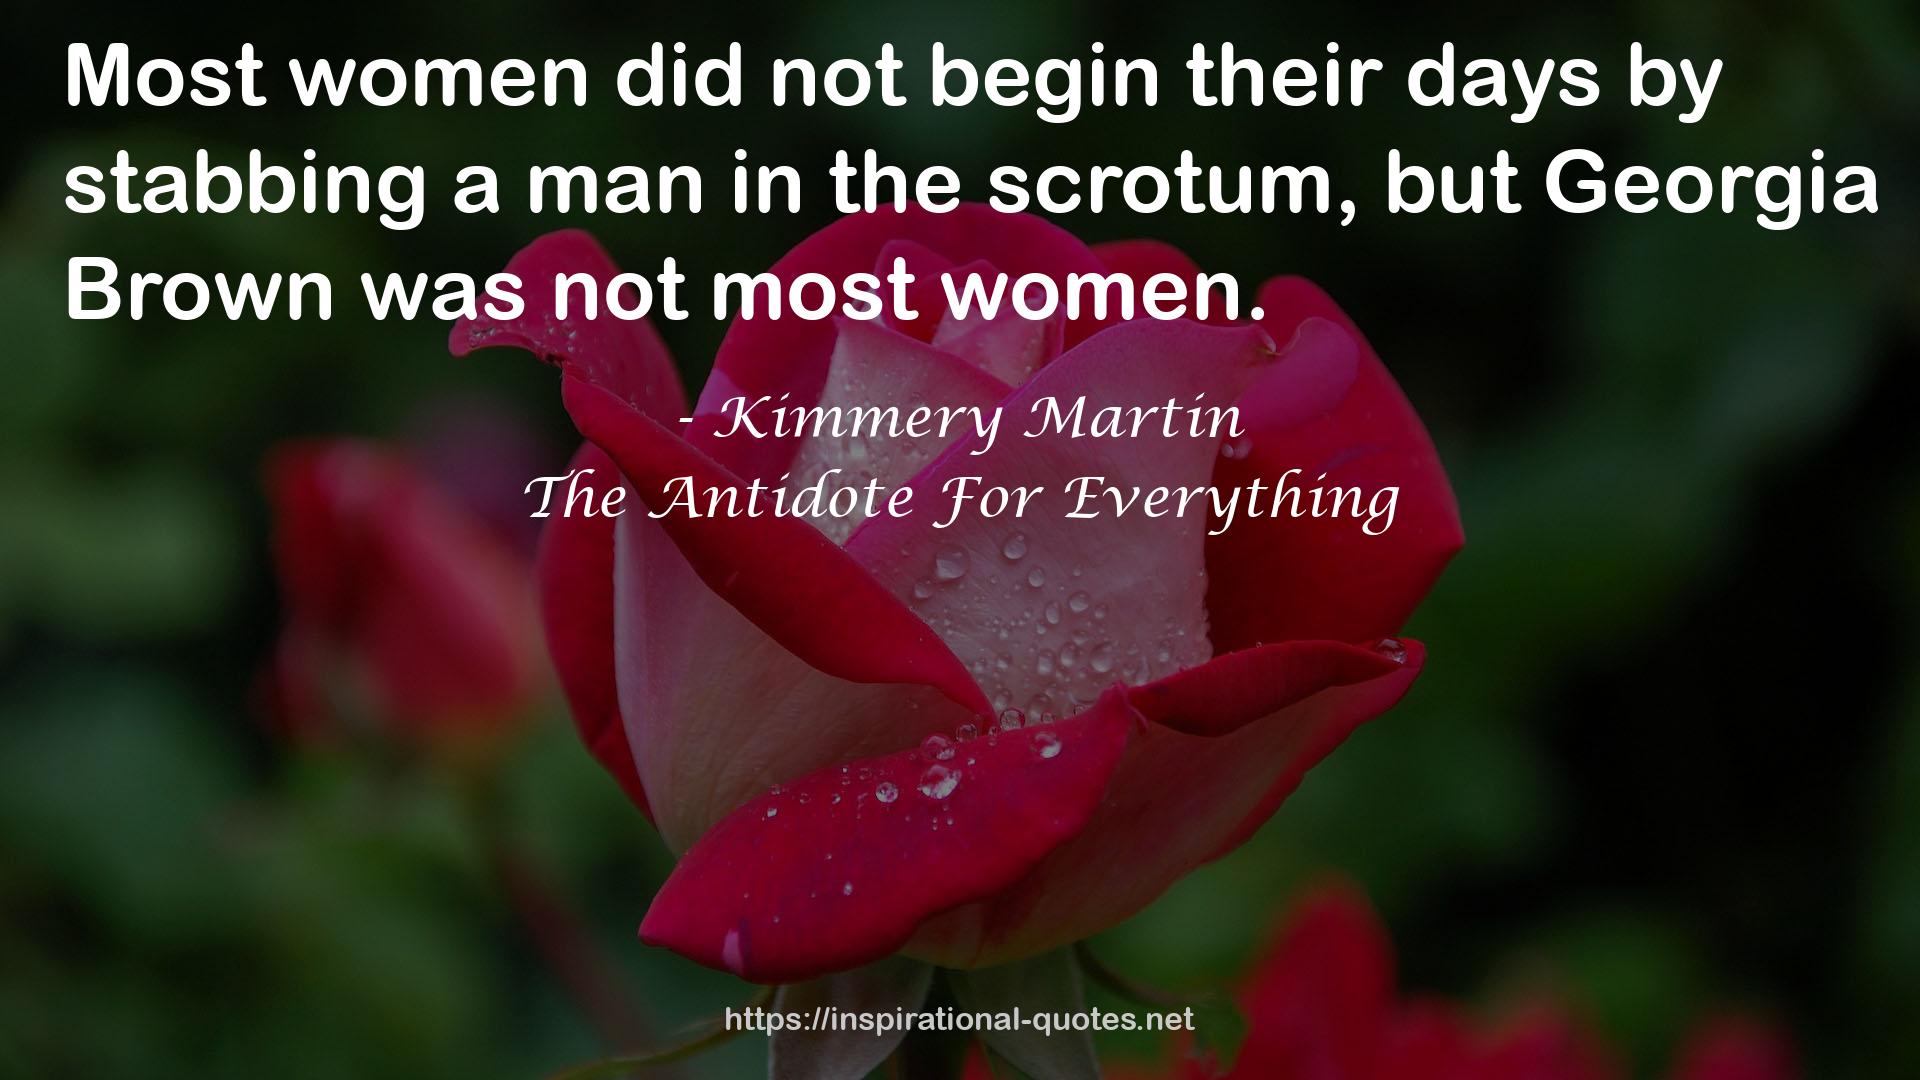 Kimmery Martin QUOTES